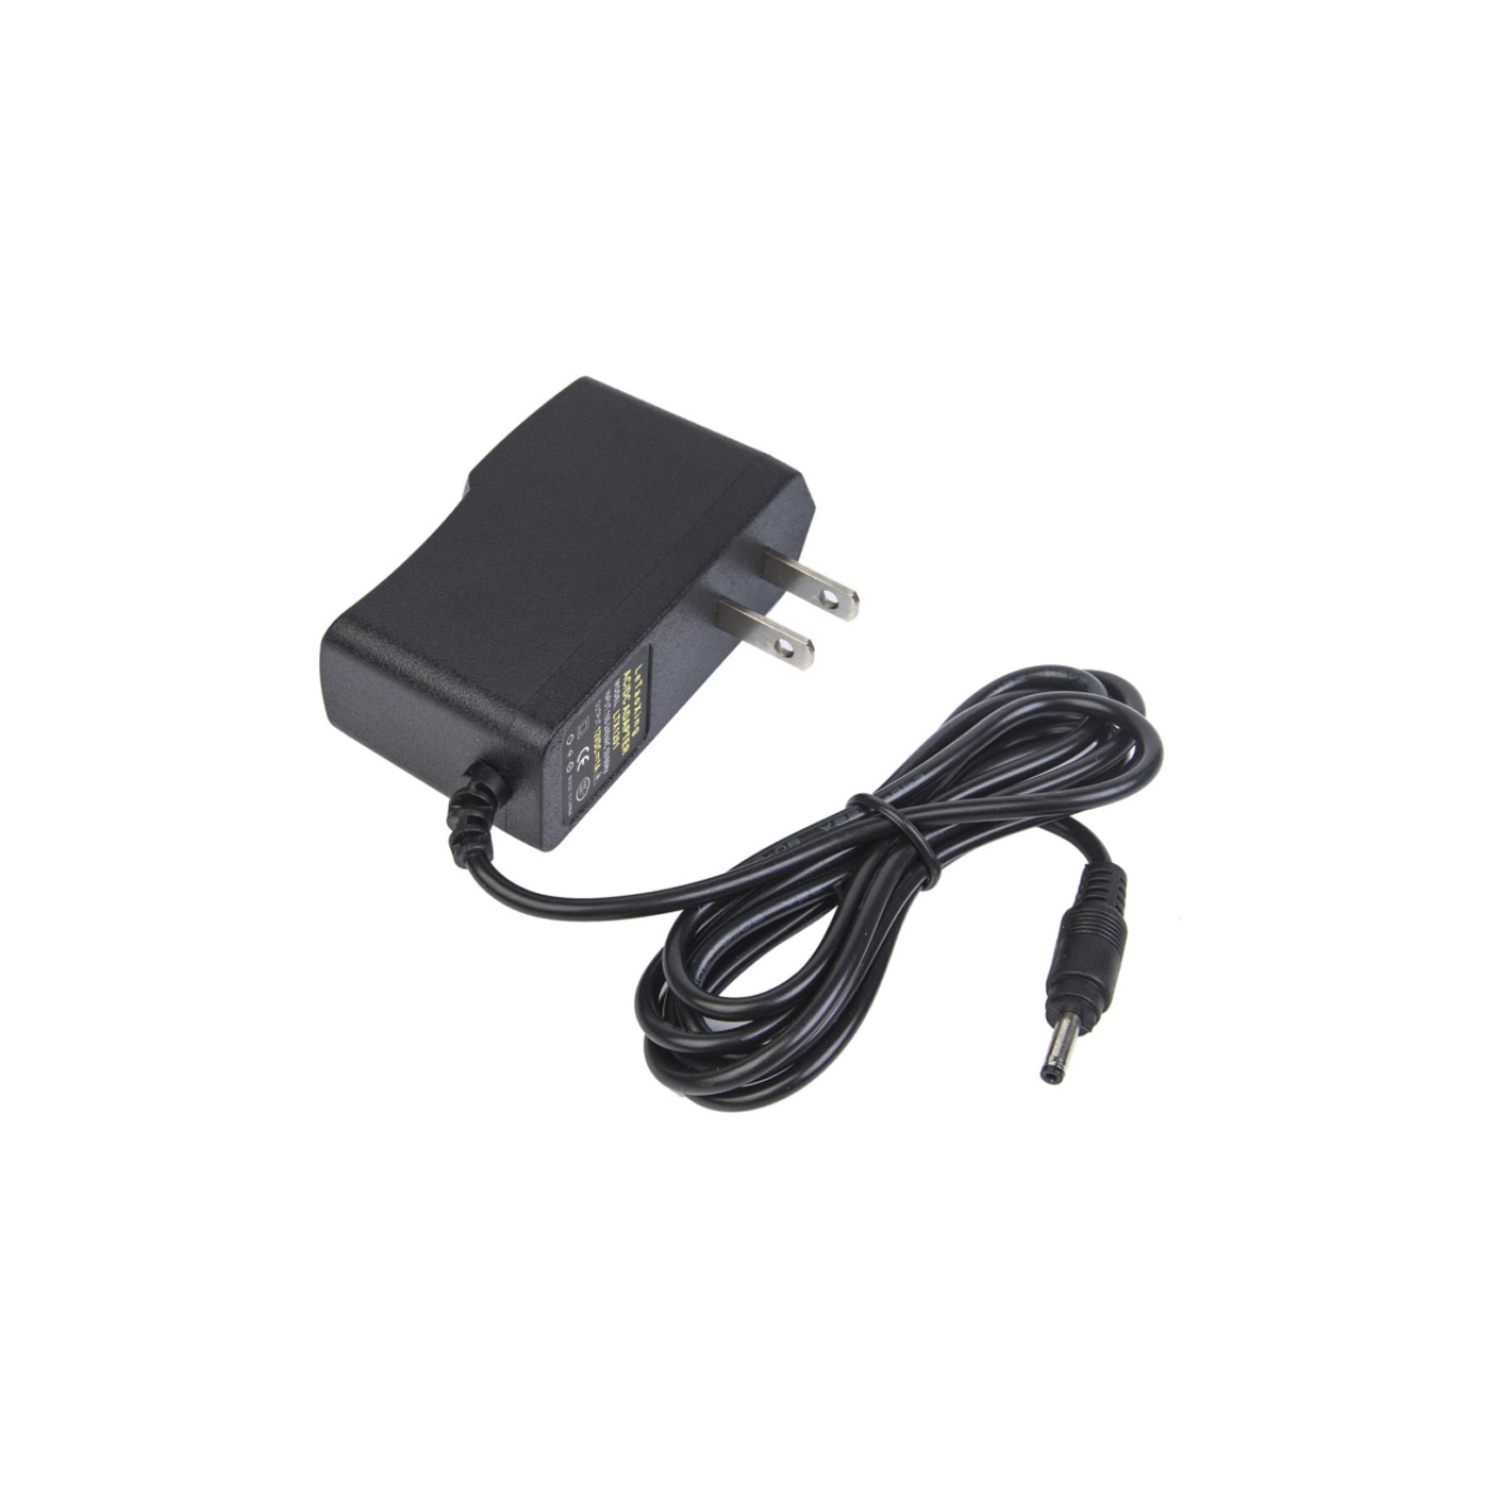 AC/DC Adapter 5V 2A 35x135 Power Supply Adapter Charger for USB Hub TV Box - axGear